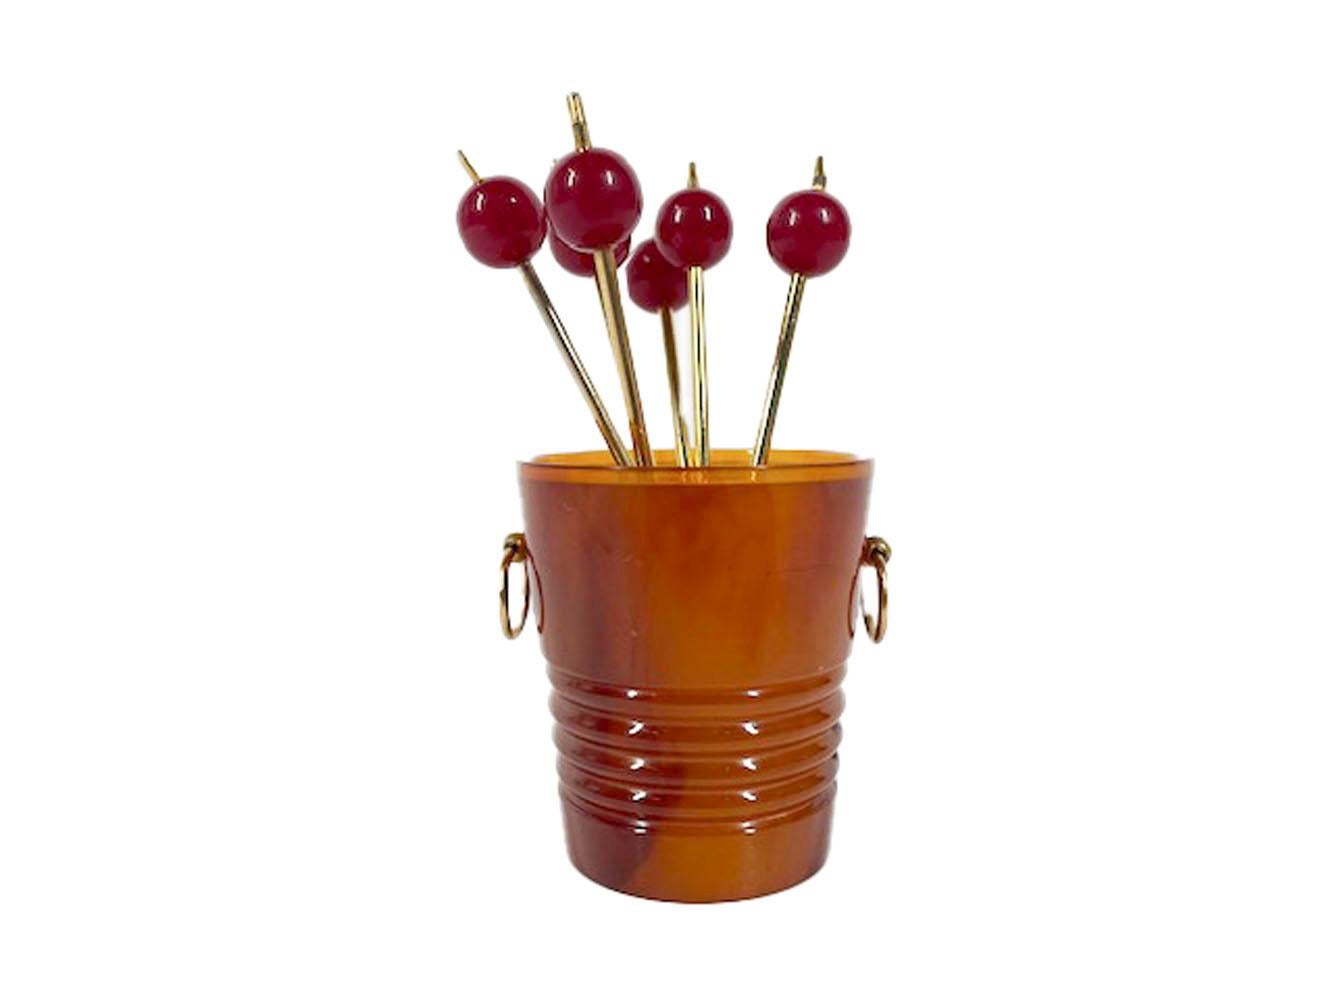 Art Deco cocktail pick set, 6 gilded picks with cherry red Lucite tops and forked ends in a holder of pail or flowerpot form made of tortoiseshell Bakelite with gilded ring handles. The bottom of the pail stamped in gold with an atomic model diagram